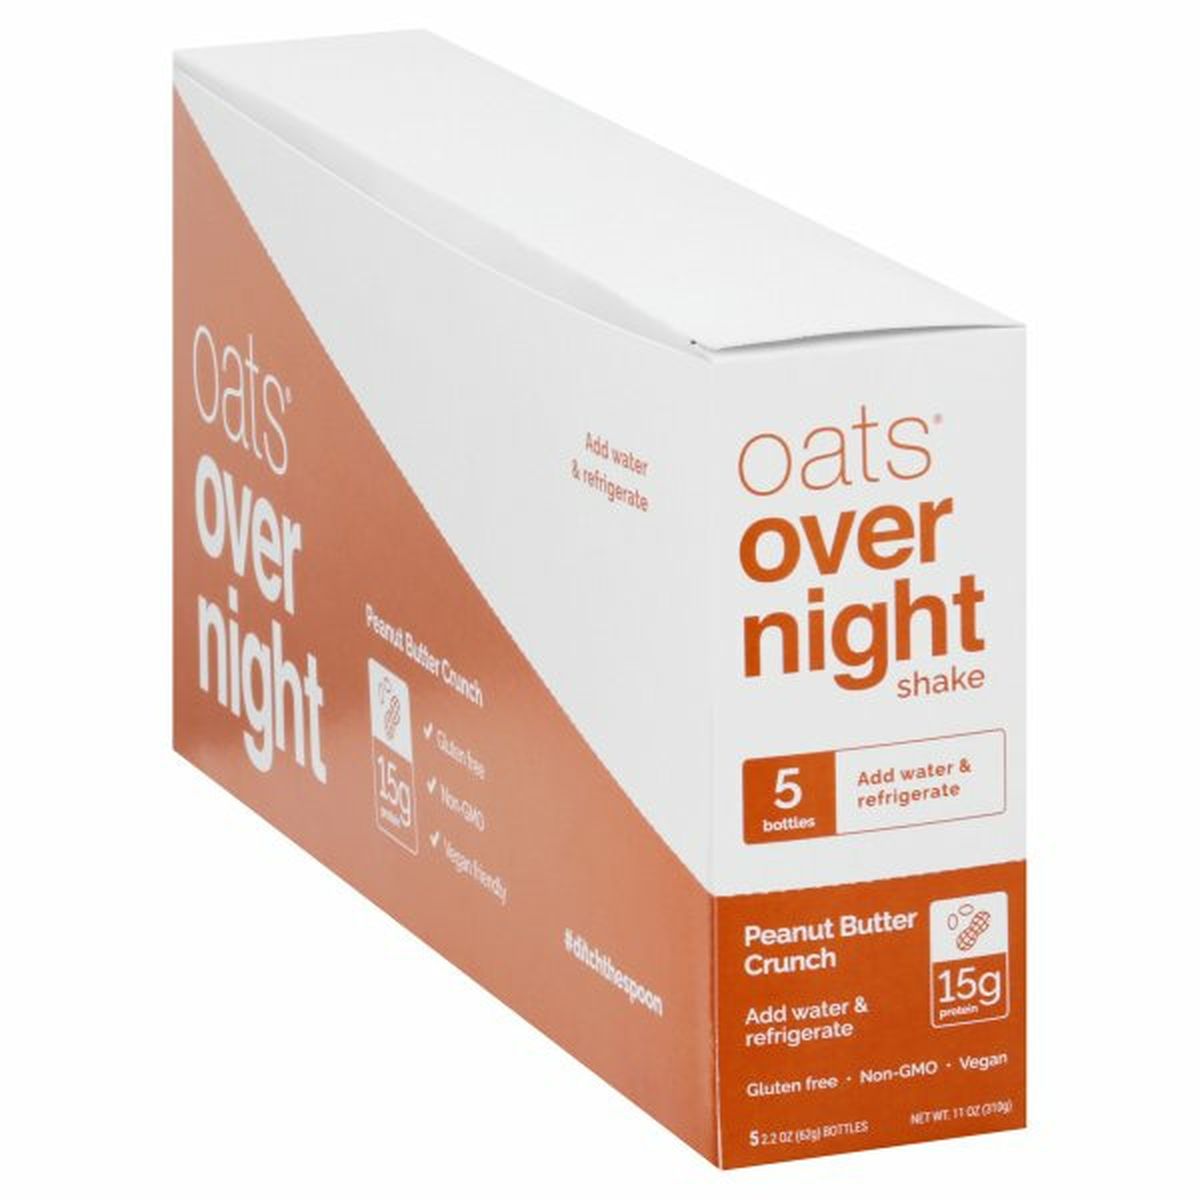 Calories in Oats Overnight Shake, Peanut Butter Crunch, 5 Pack